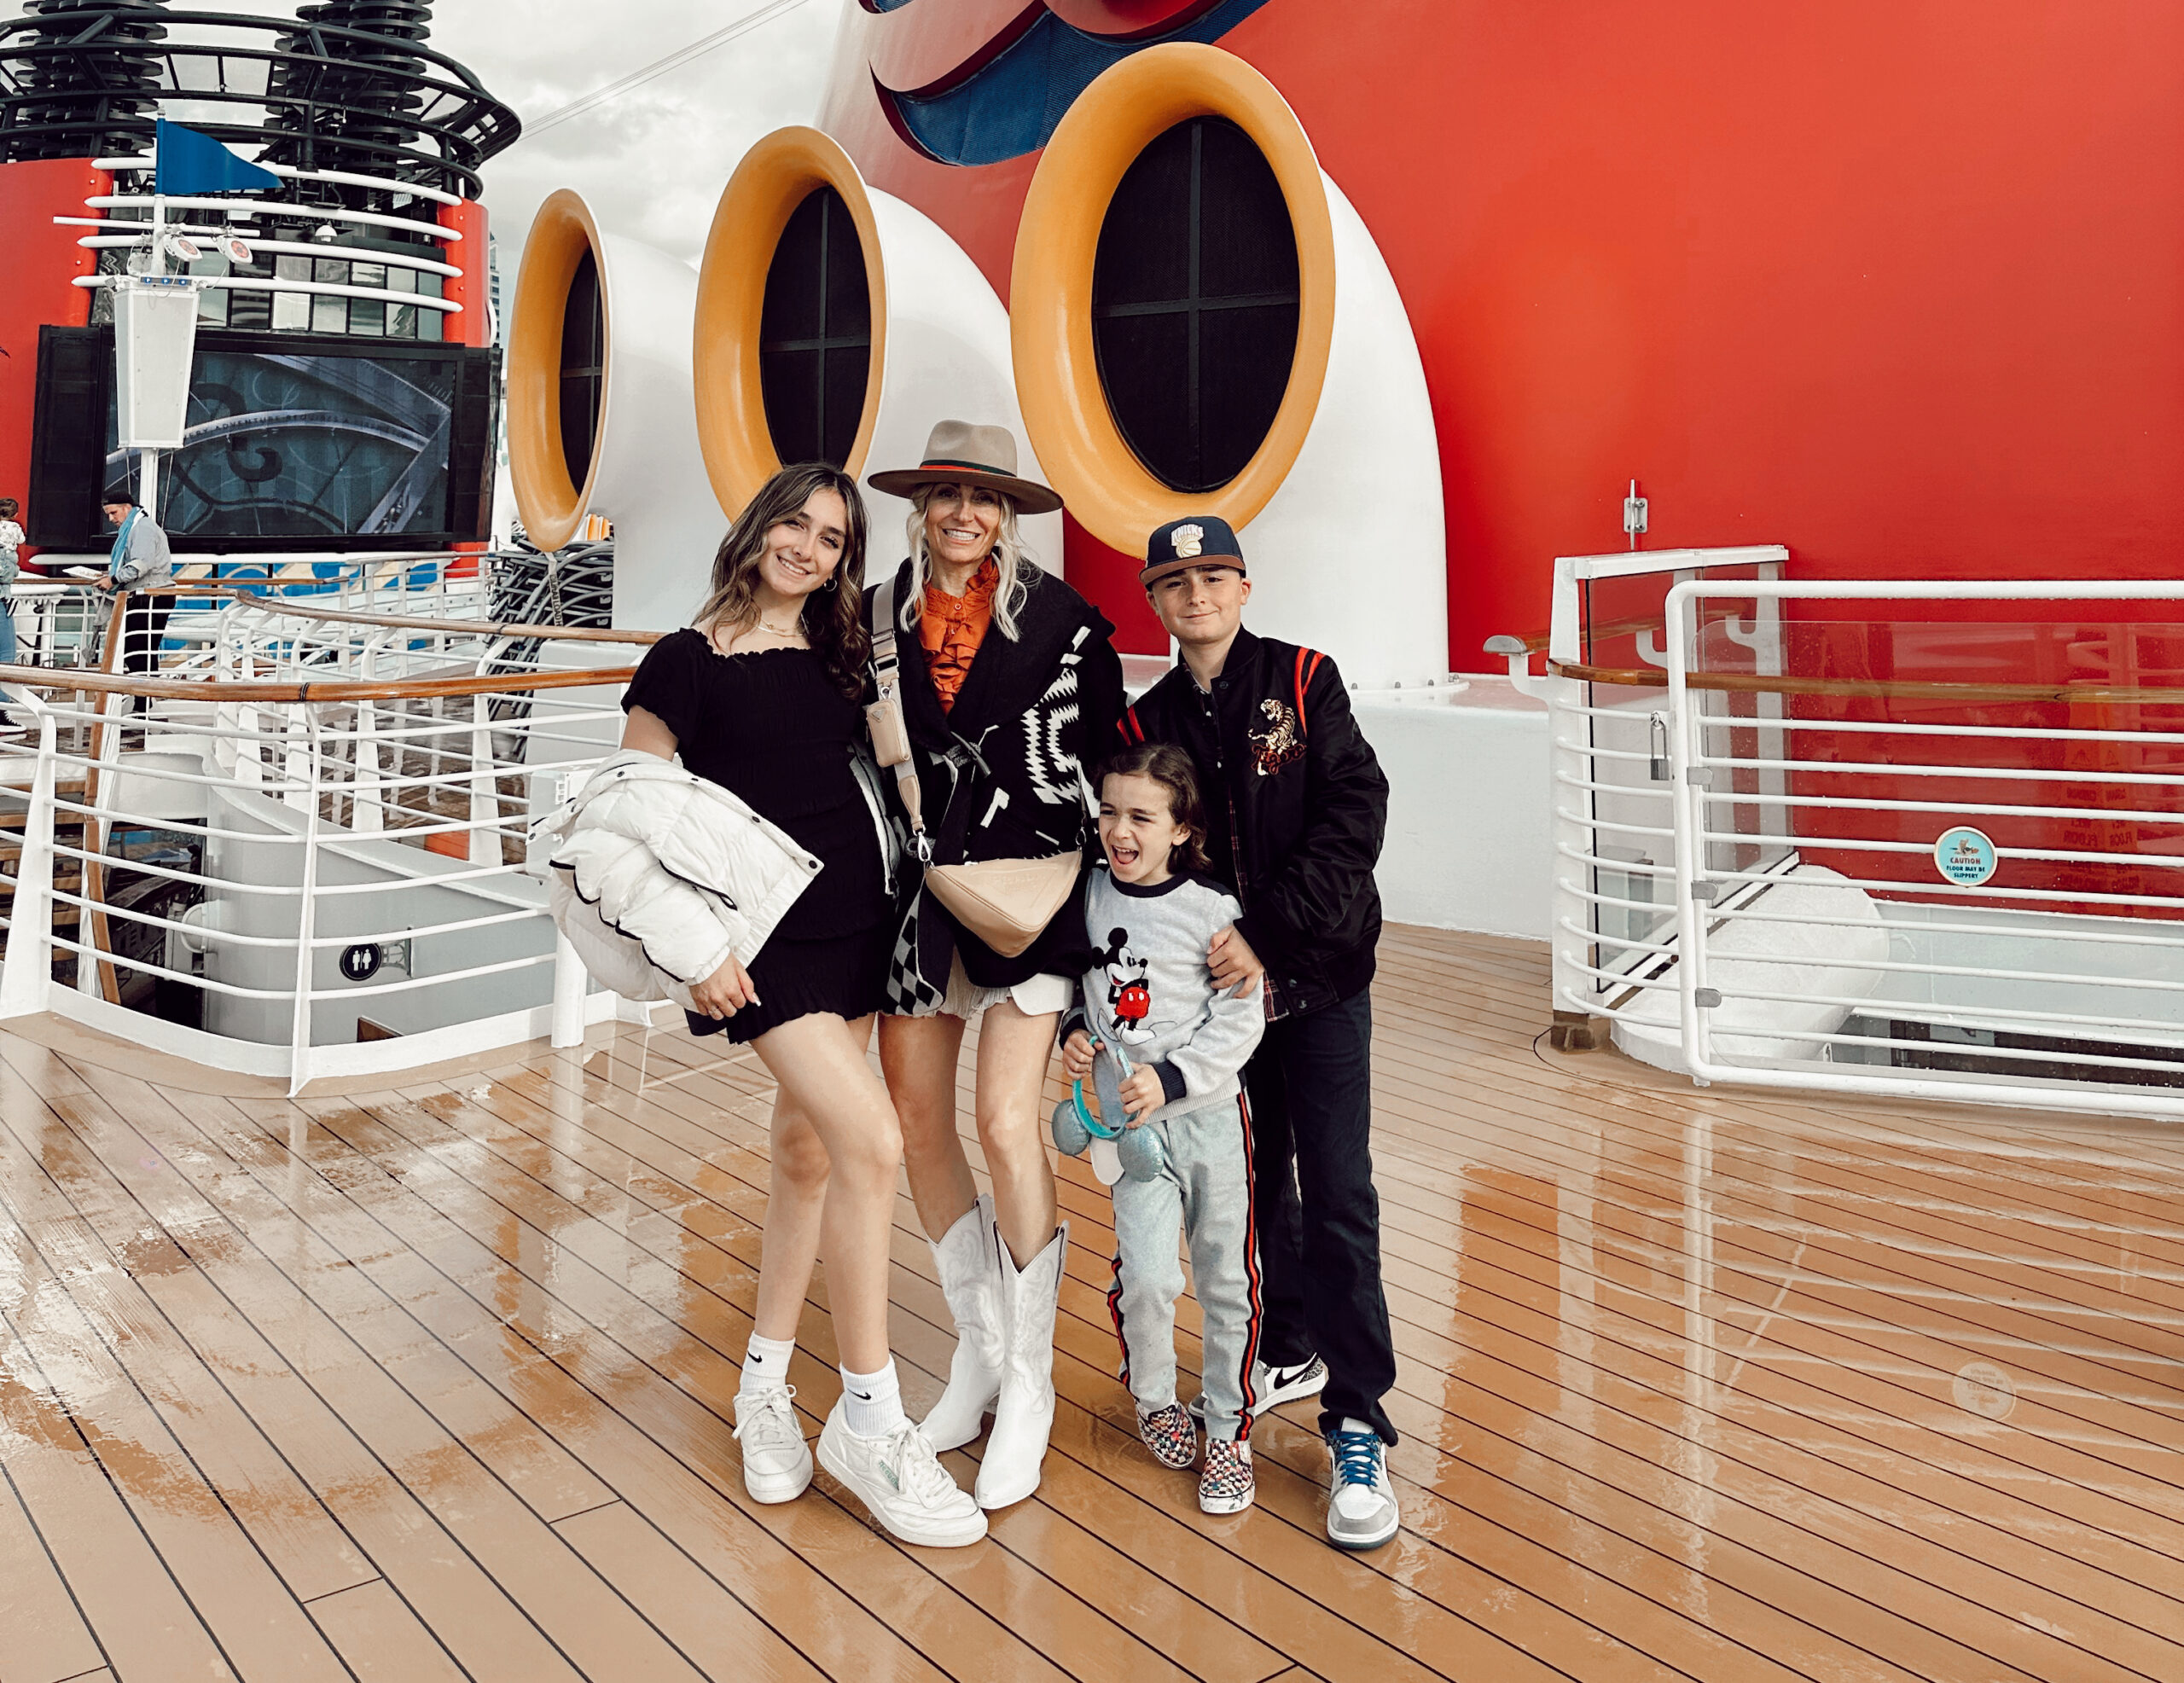 Disney Cruise Pirate Night Dinner Menu - The Mommy Mouse Clubhouse